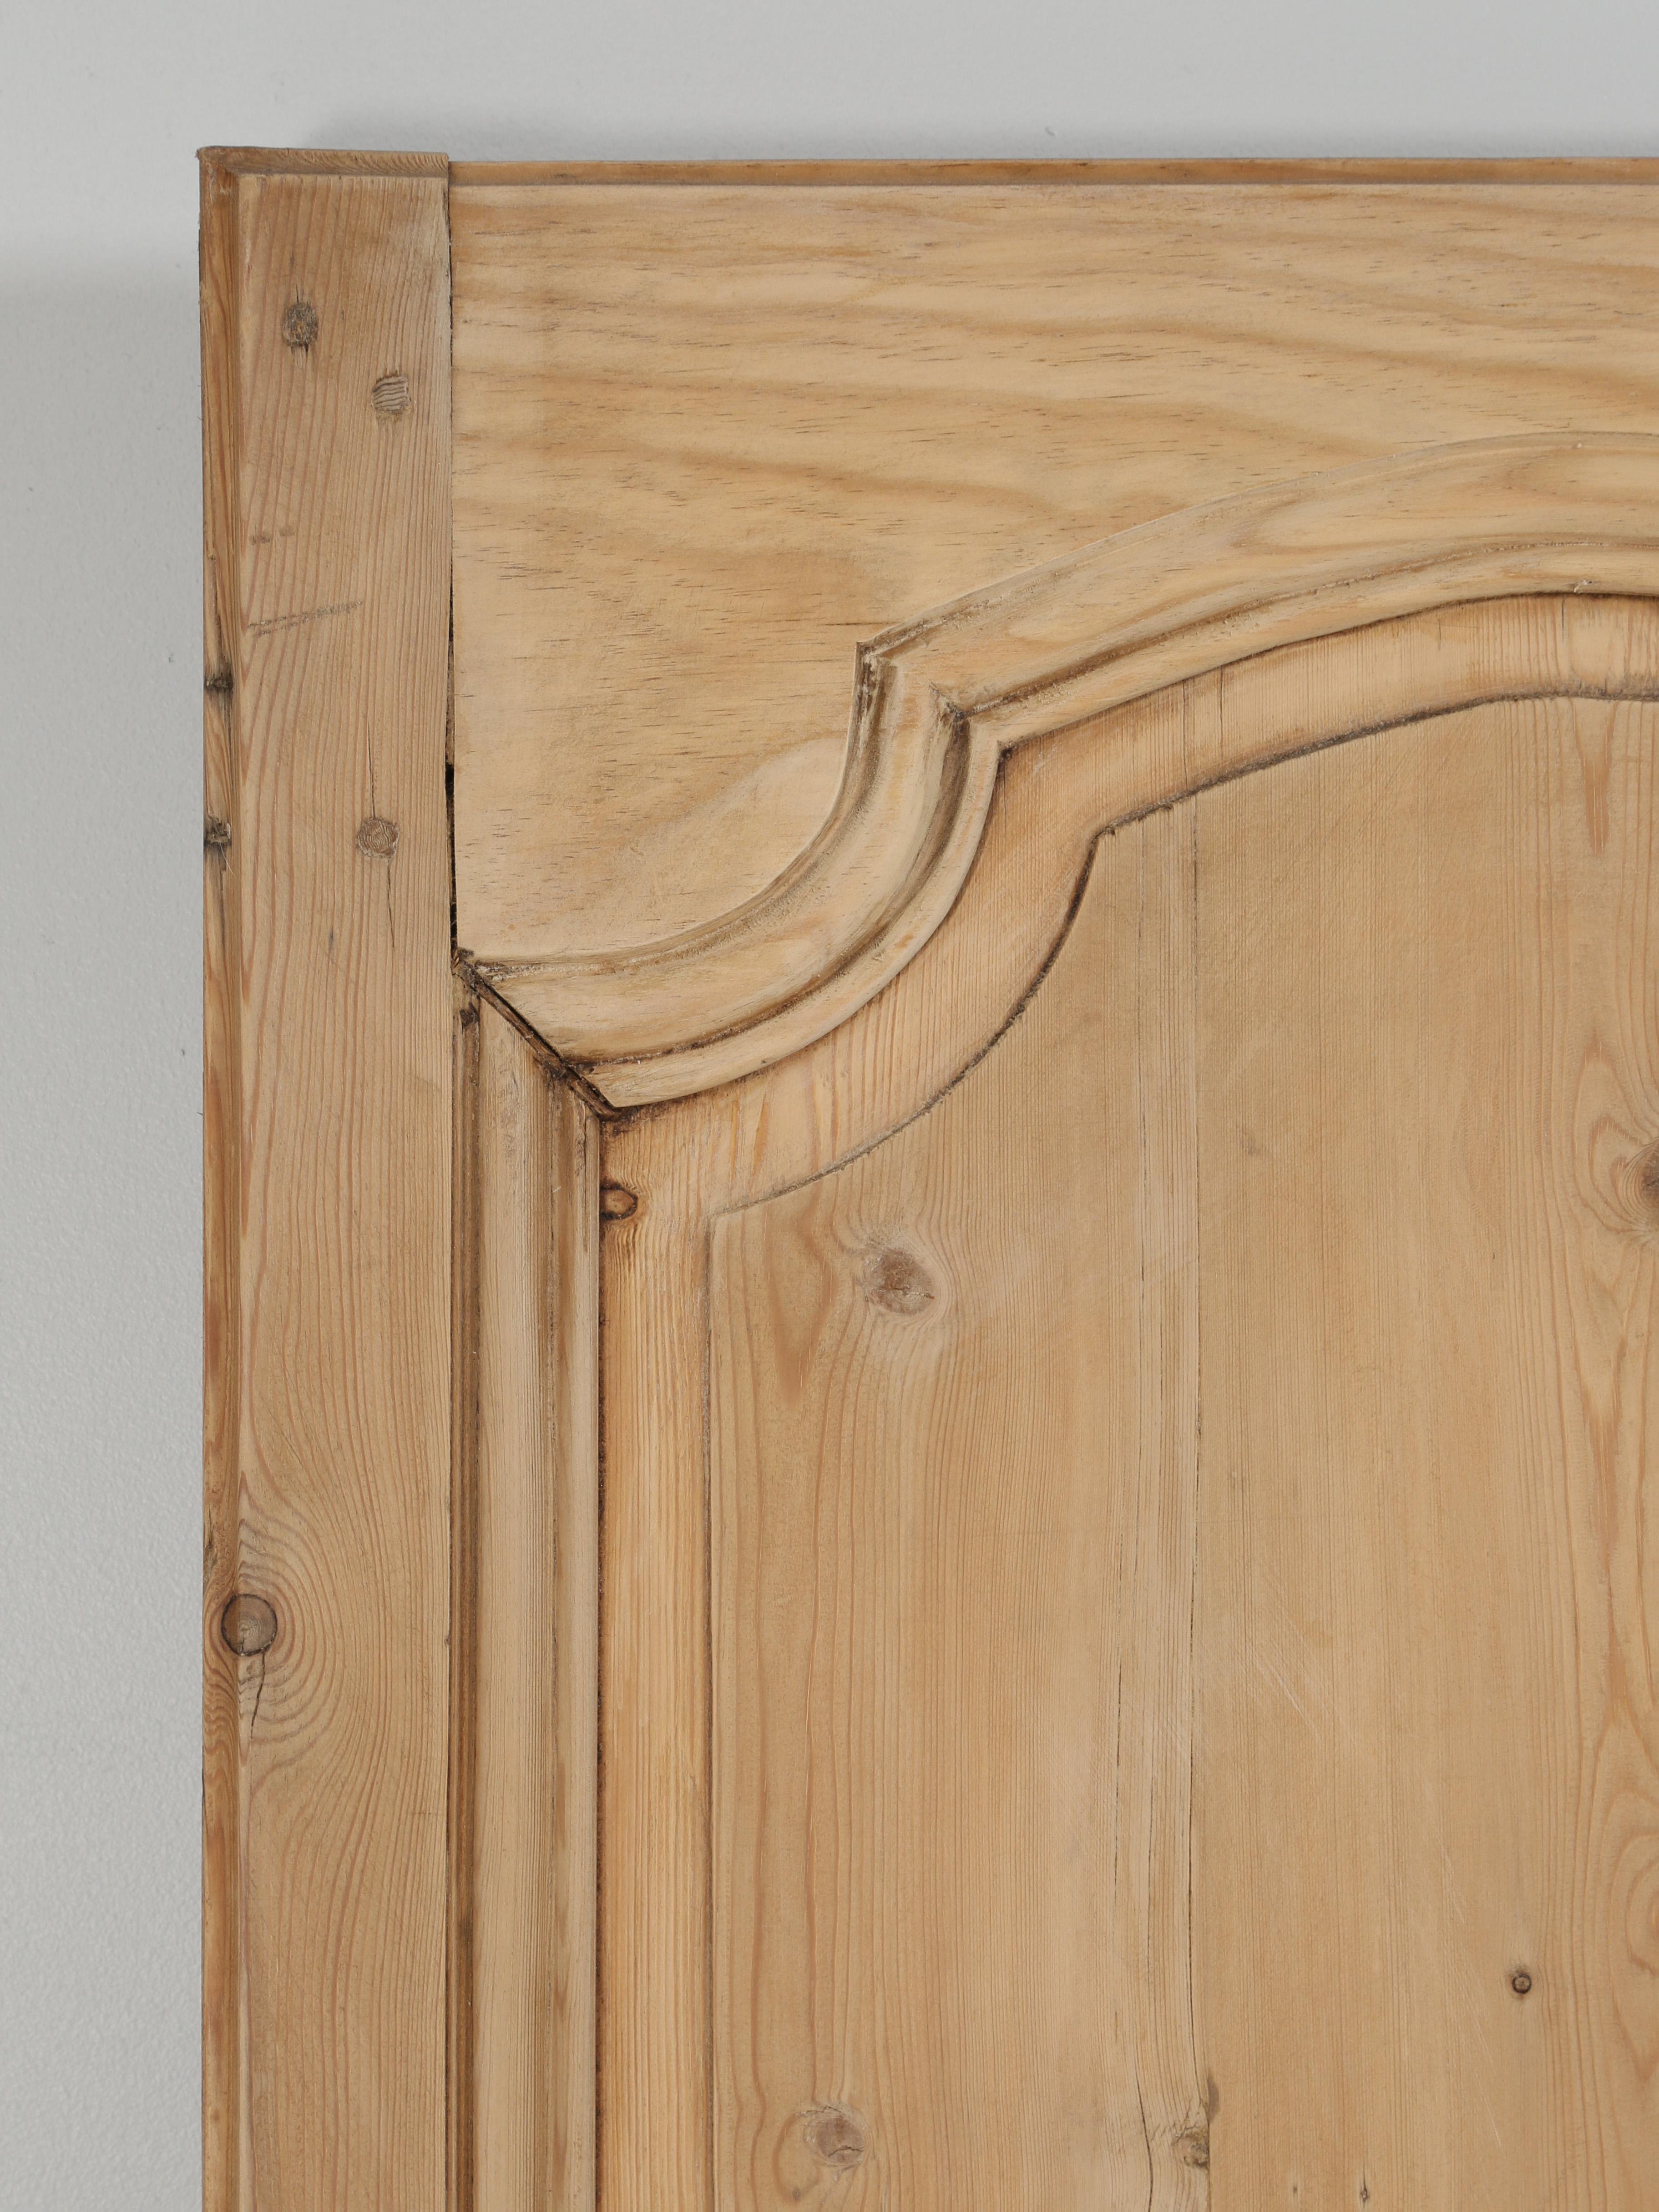 Hand-Carved Antique '2' Pairs of French Doors From Toulouse Region Stripped to Raw Wood